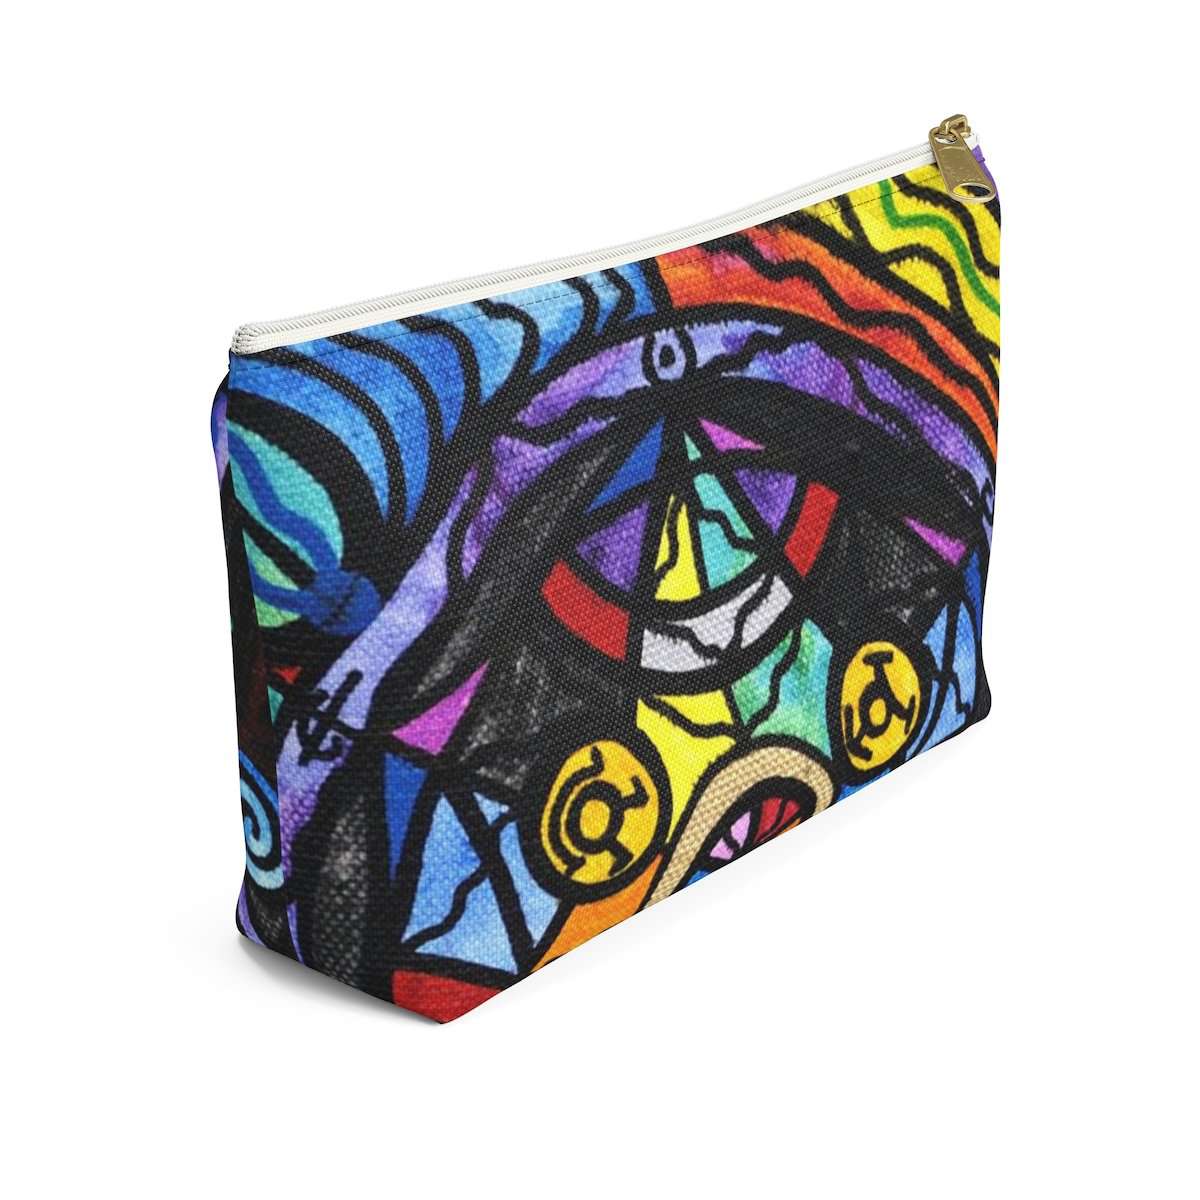 we-are-the-best-place-to-buy-alchemy-accessory-pouch-w-t-bottom-sale_2.jpg